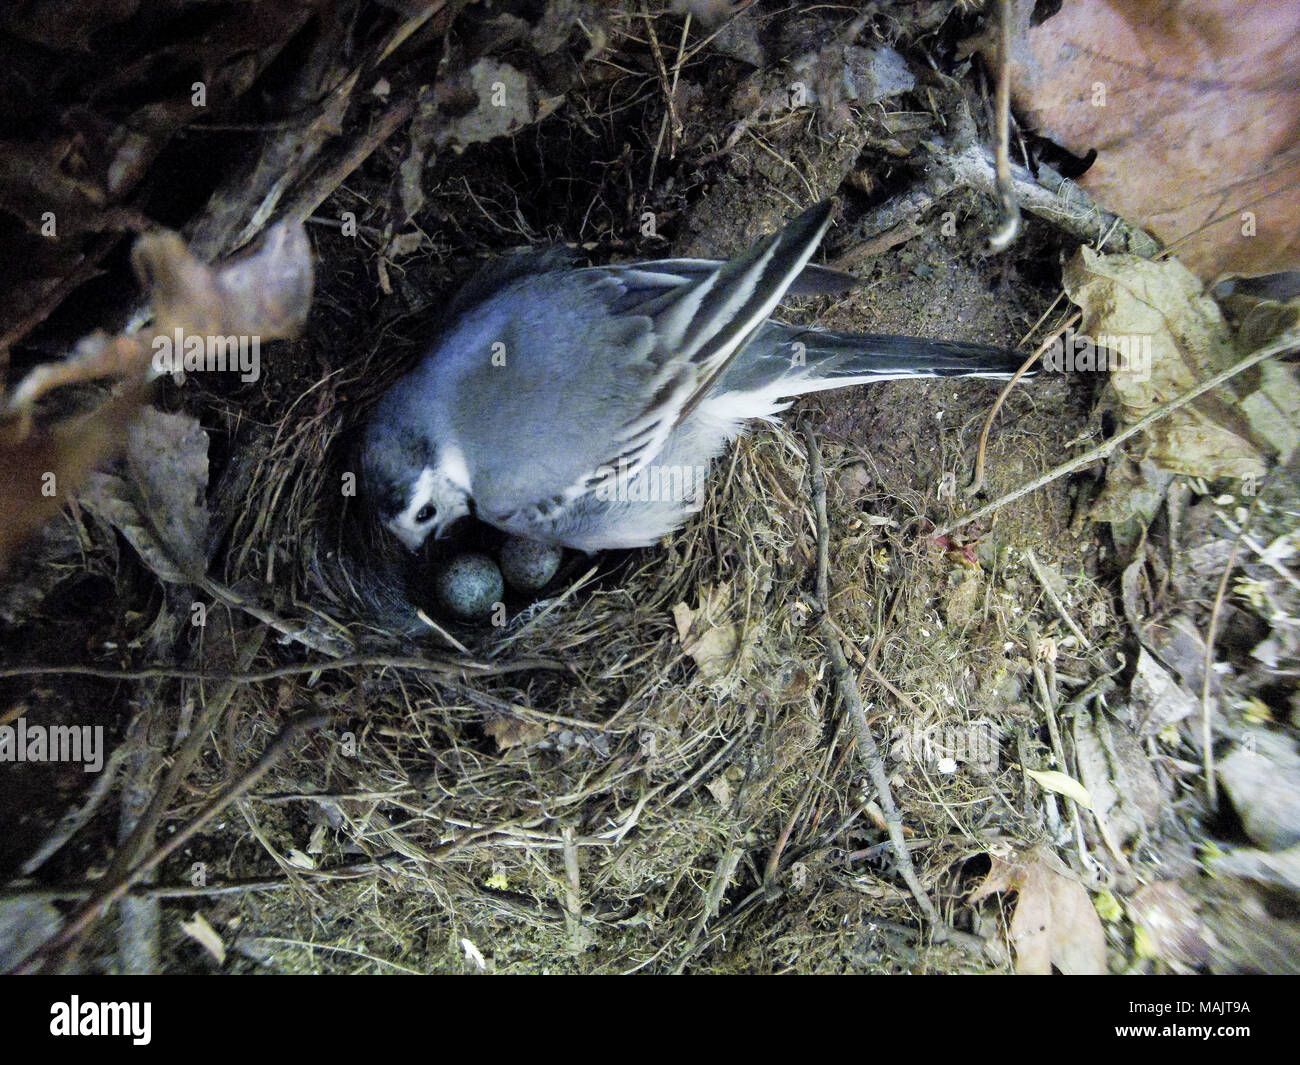 Motacilla alba. The nest of the White Wagtail in nature.  Moscow, Russia. Stock Photo